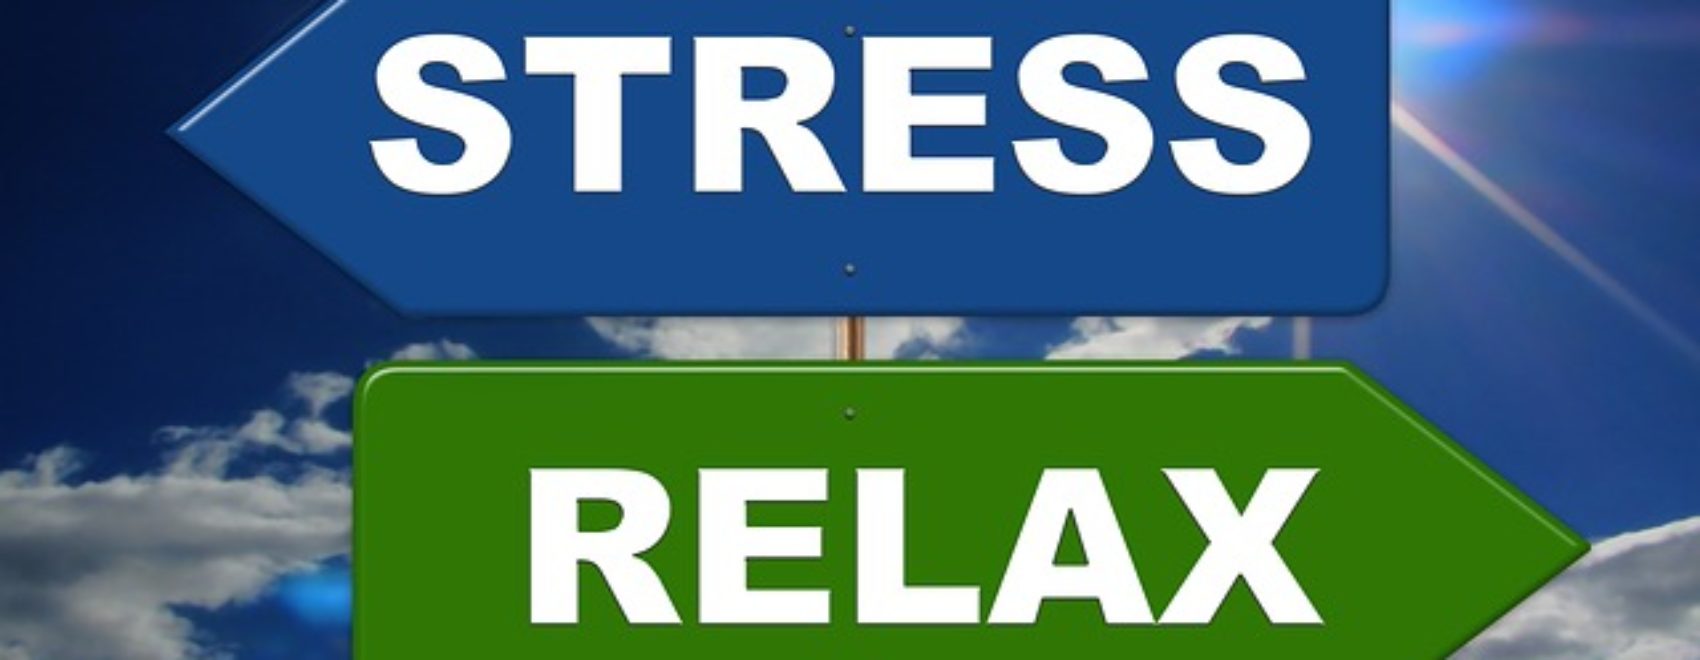 stress-relax signs